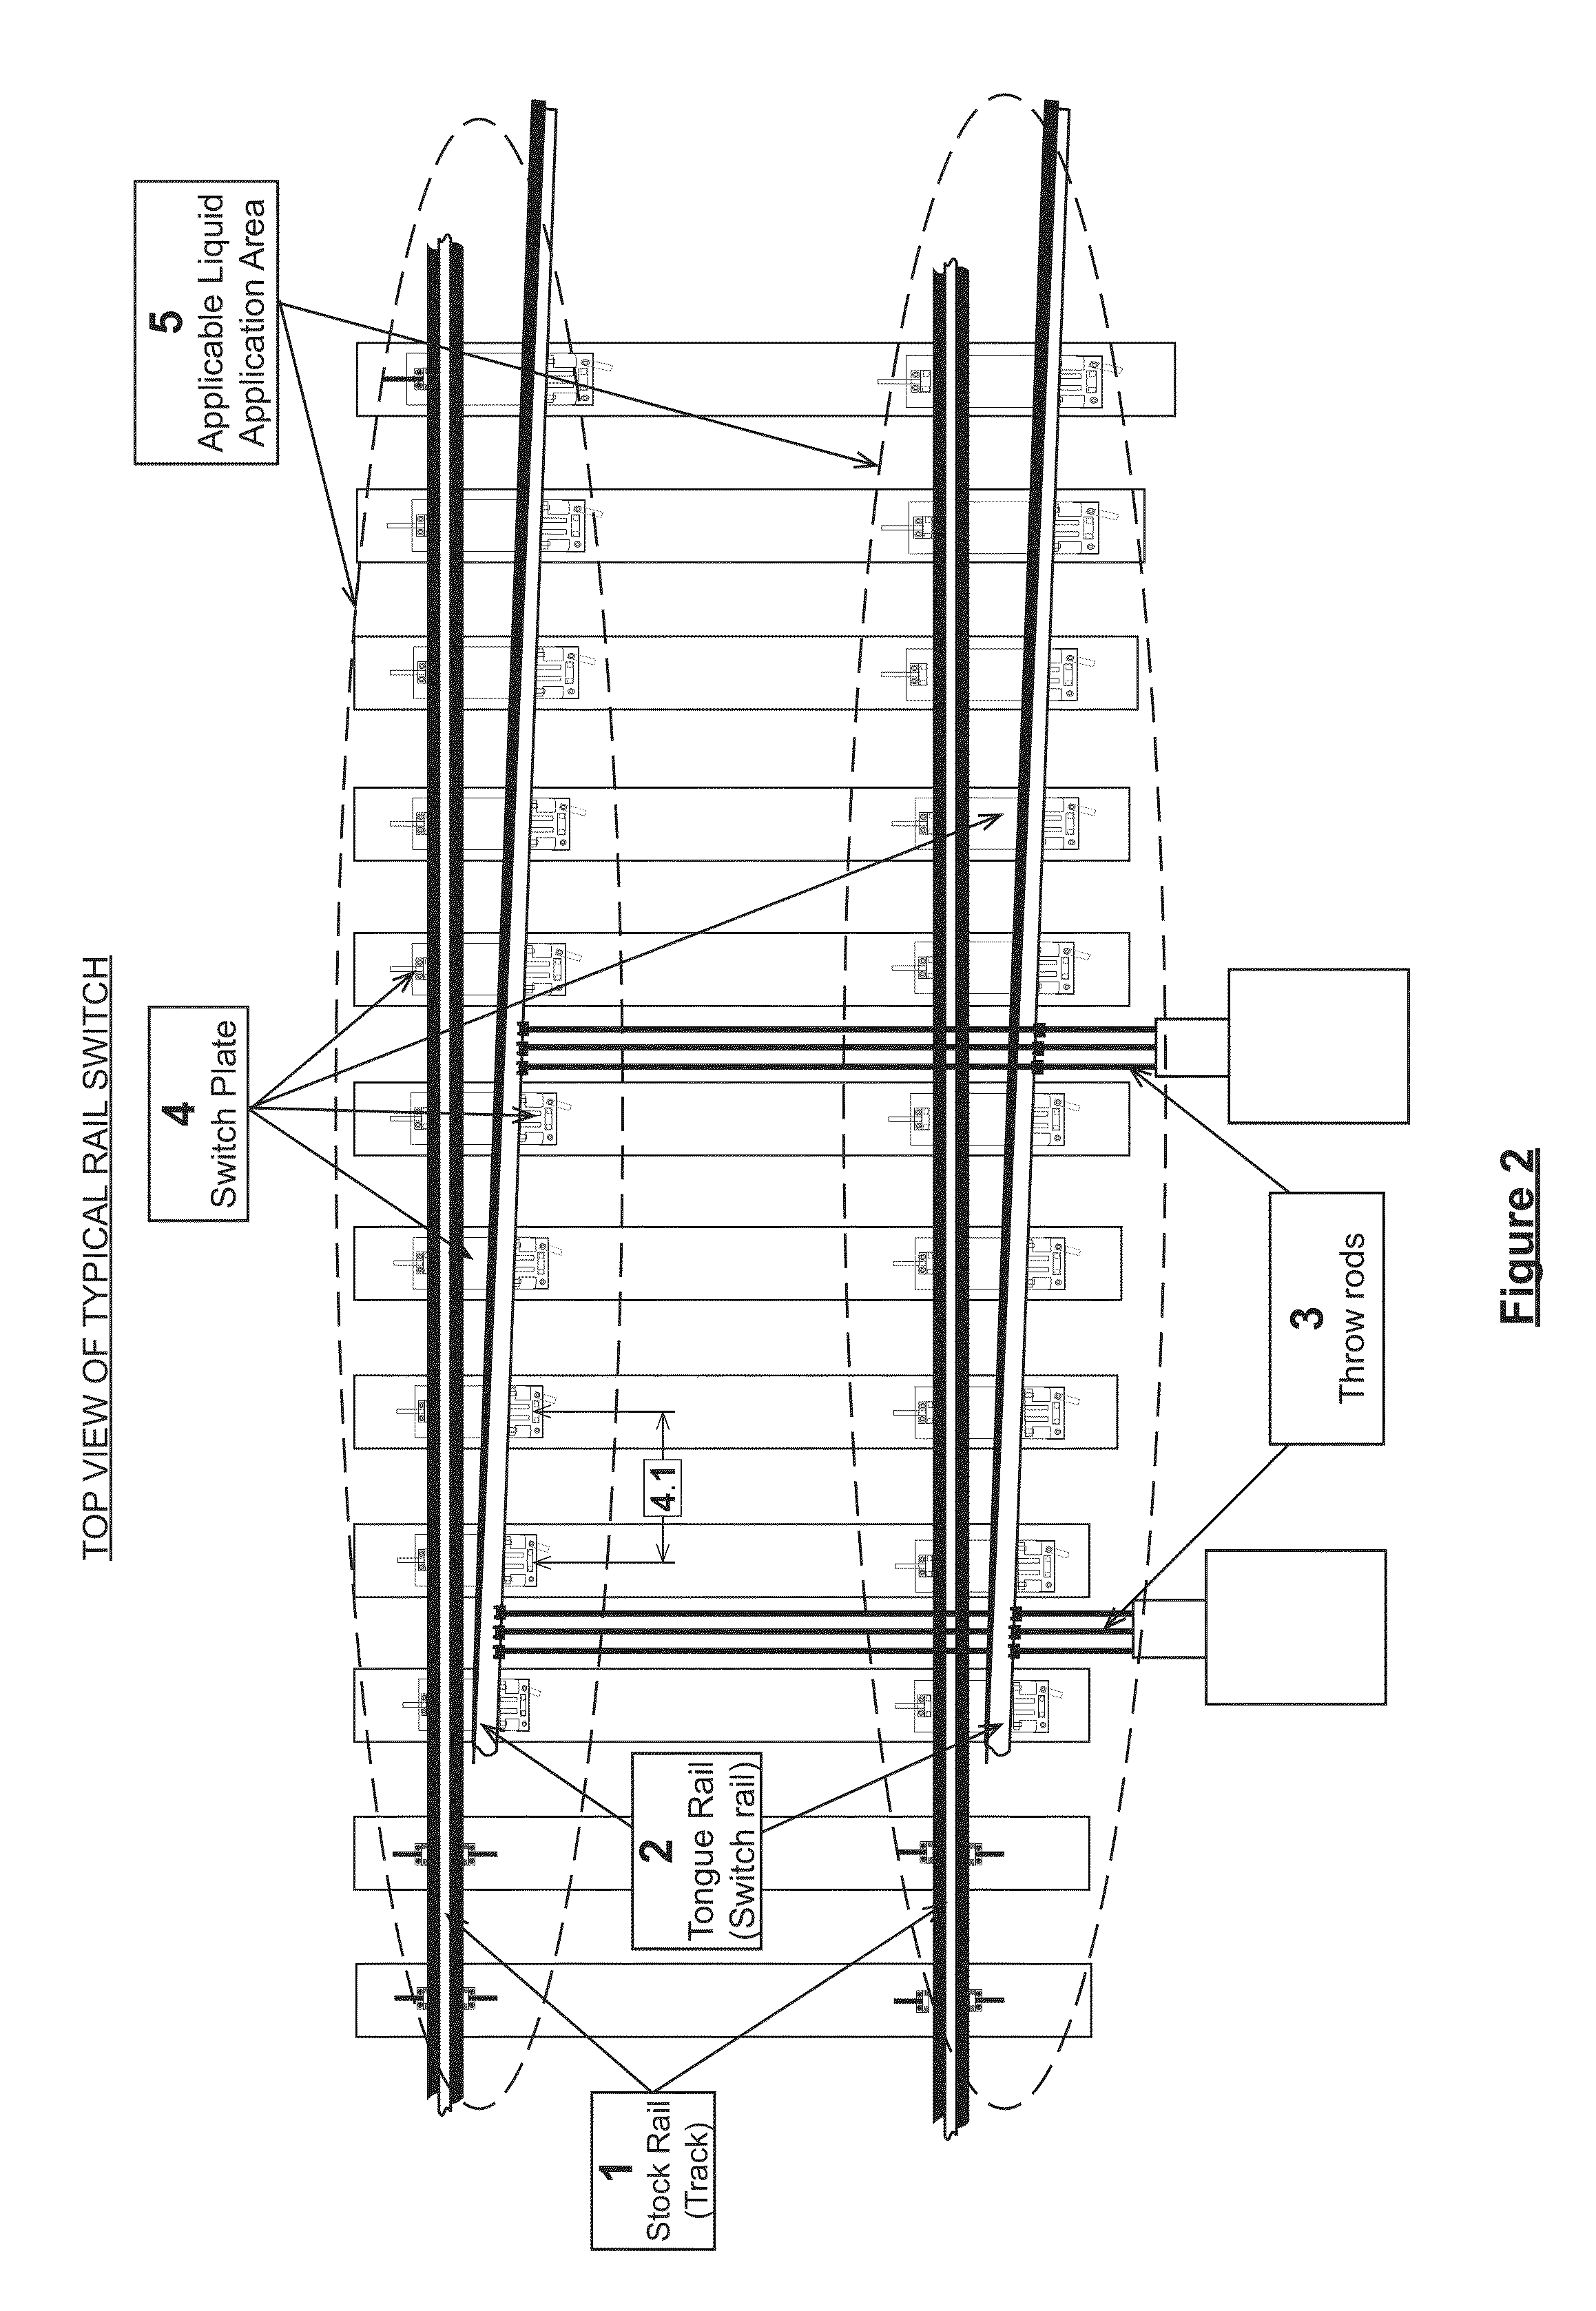 Perforated fluid dispensing hose or tube for the purpose of applying liquids and/or gases to railroad tracks including railroad switches, railroad crossings, bridge overheads and tunnel walls